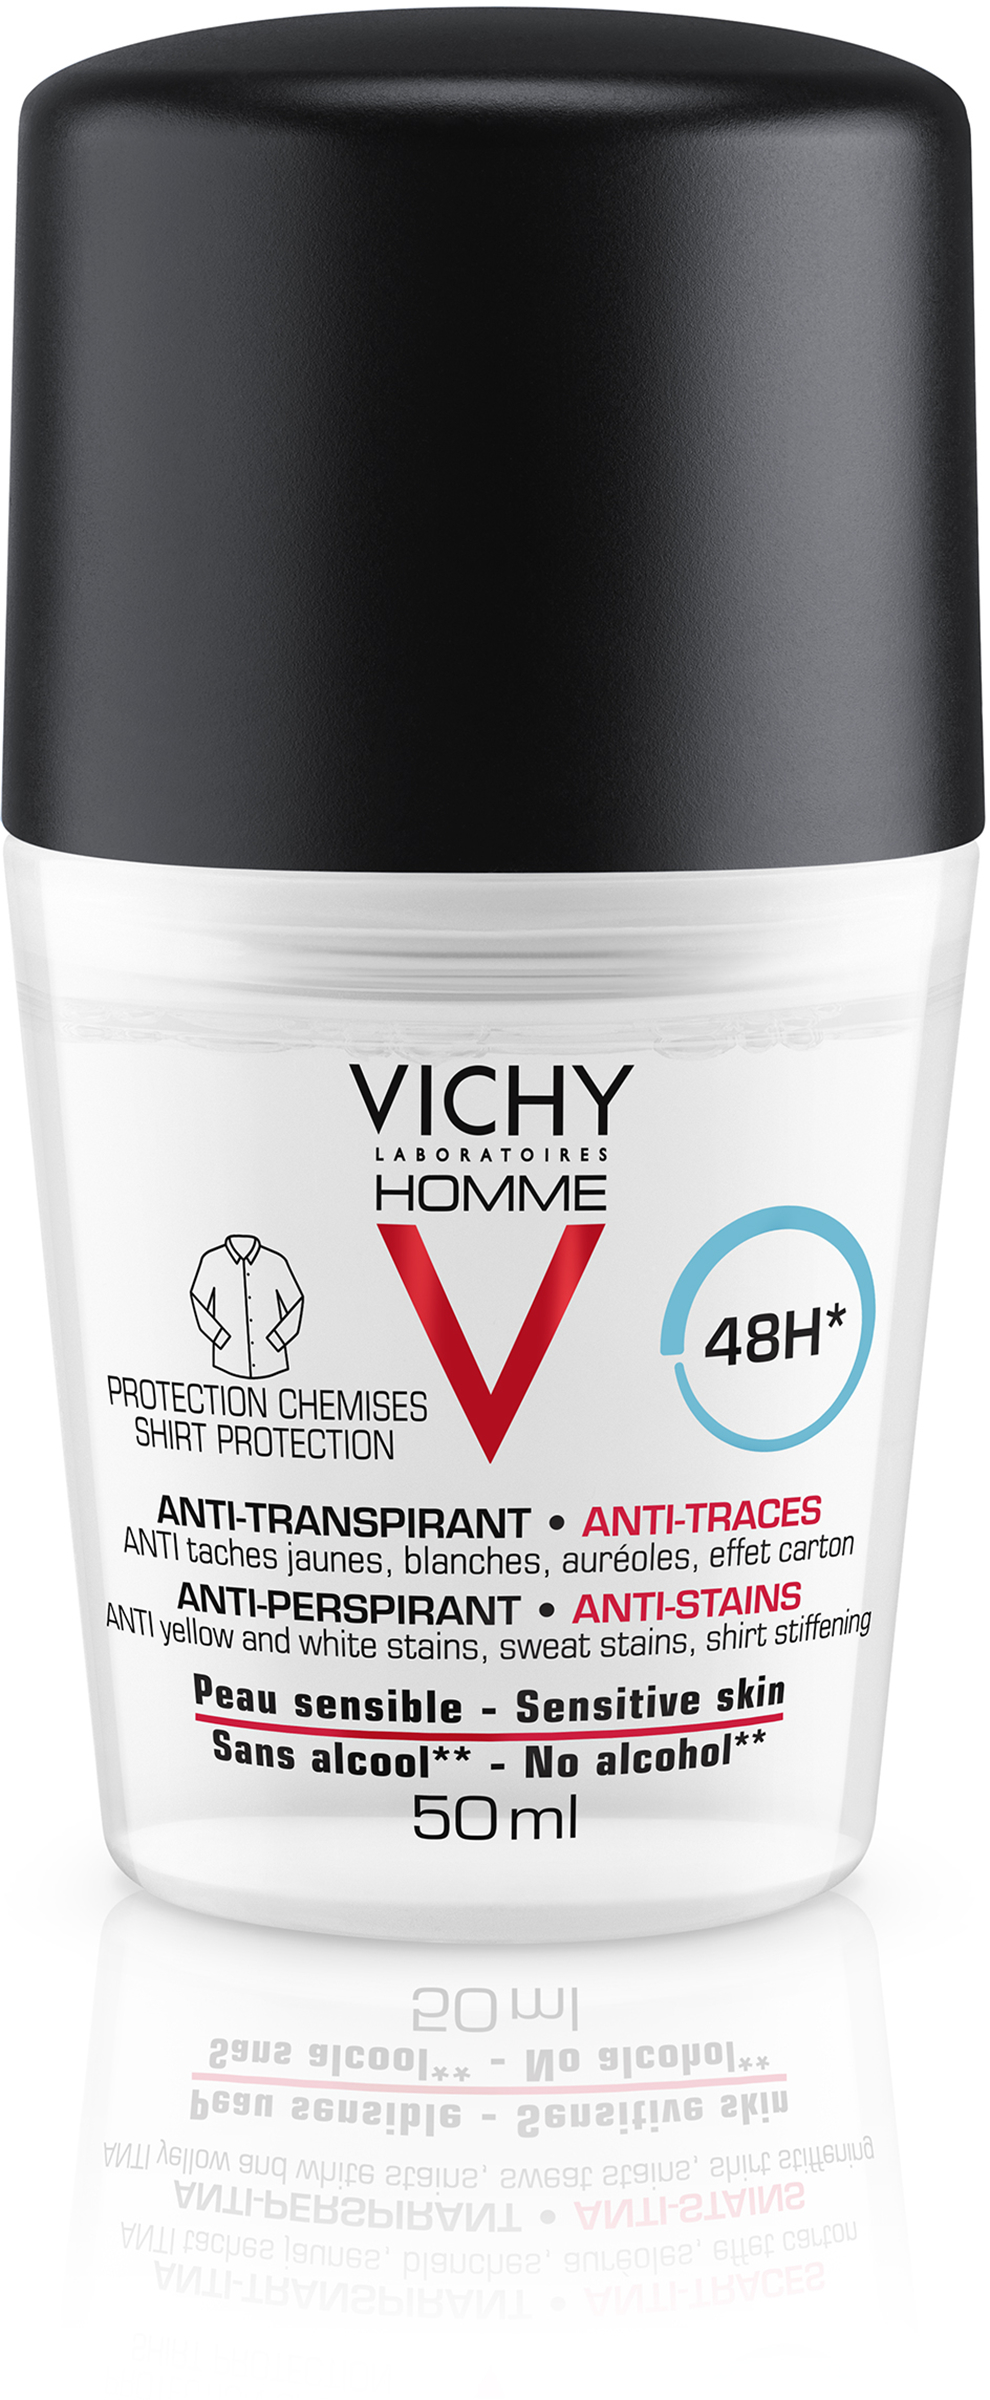 Vichy Homme Anti-Perspirant 48H Shirt Protection Deodorant 50 ml